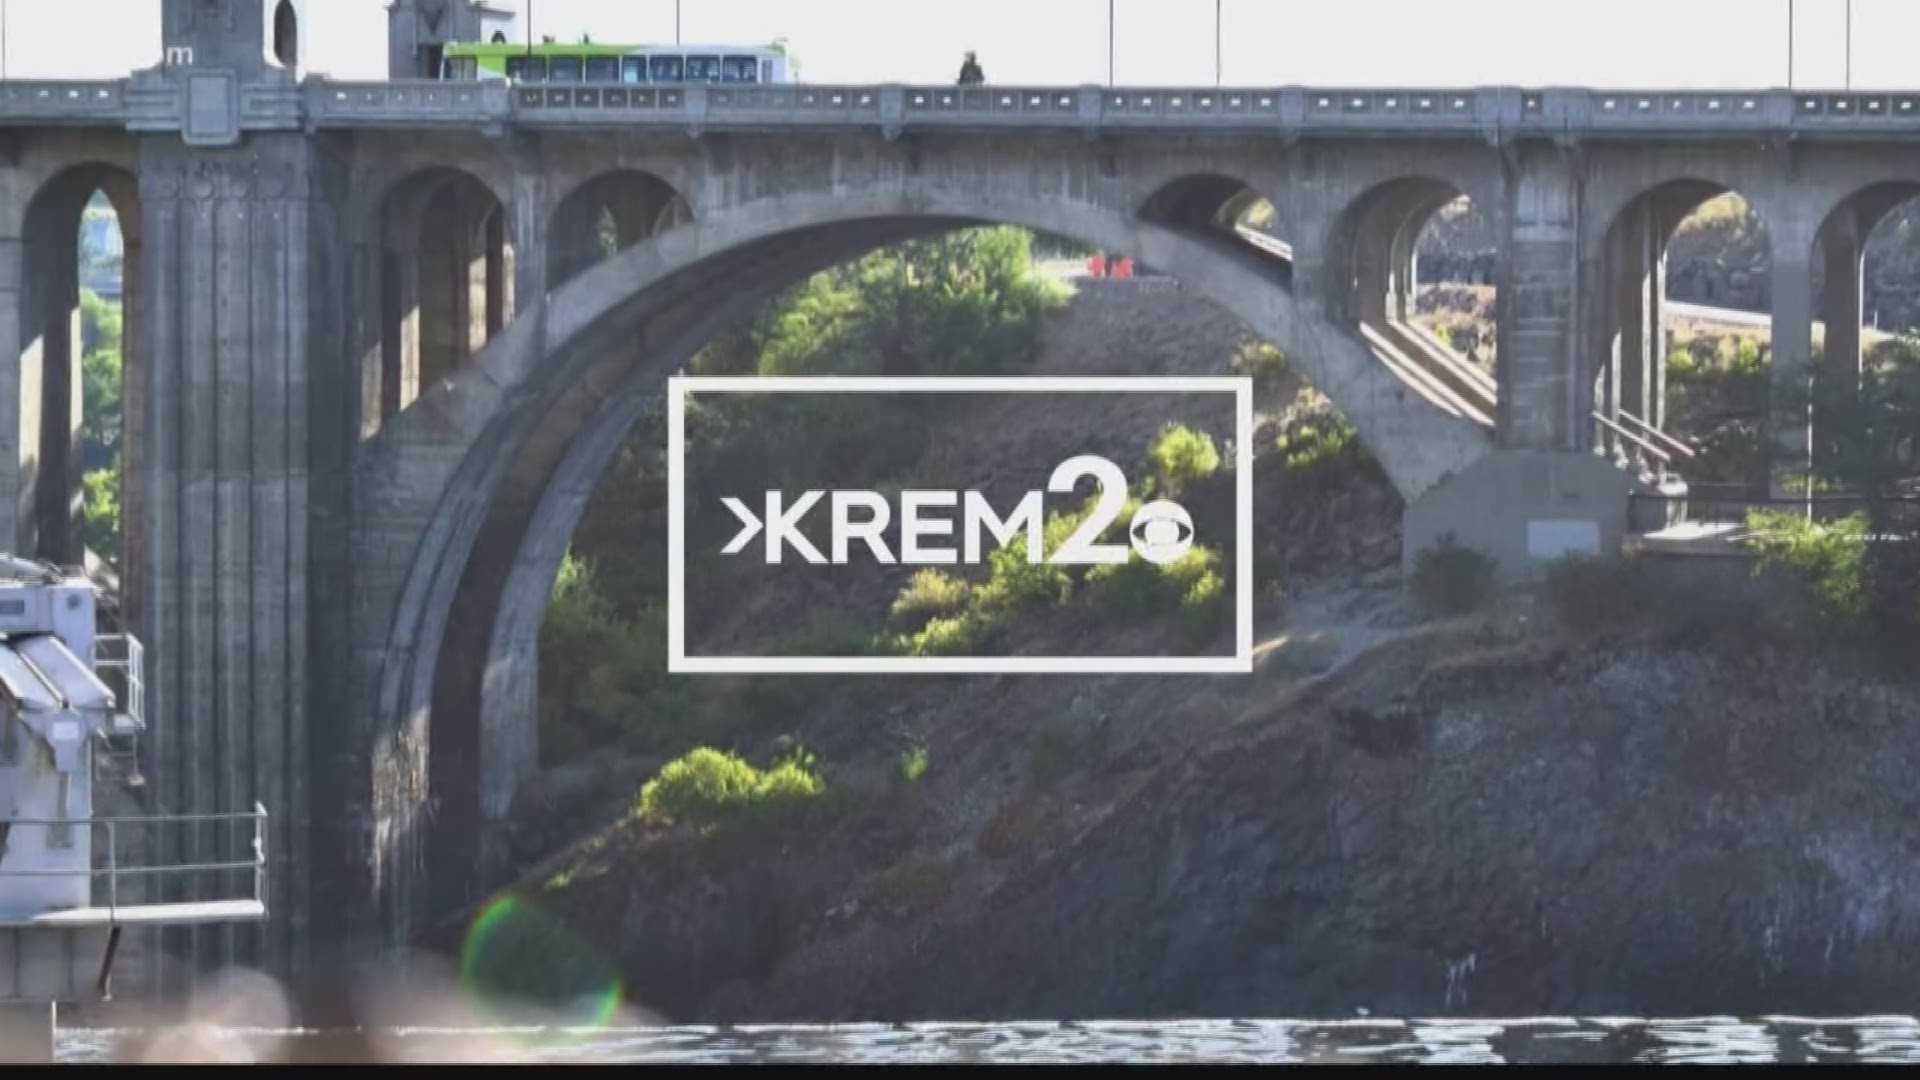 KREM 2 News at 6 coronavirus coverage and other top stories for Spokane and North Idaho on May 29, 2020